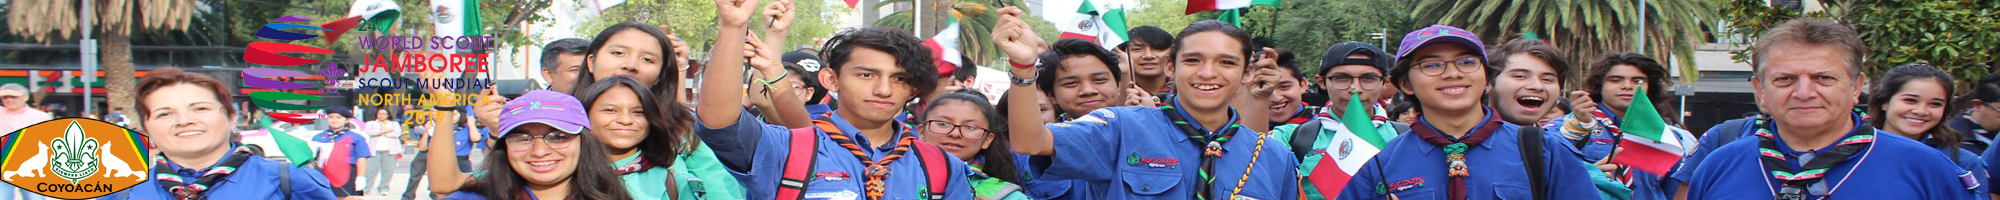 Scouts Coyoacán